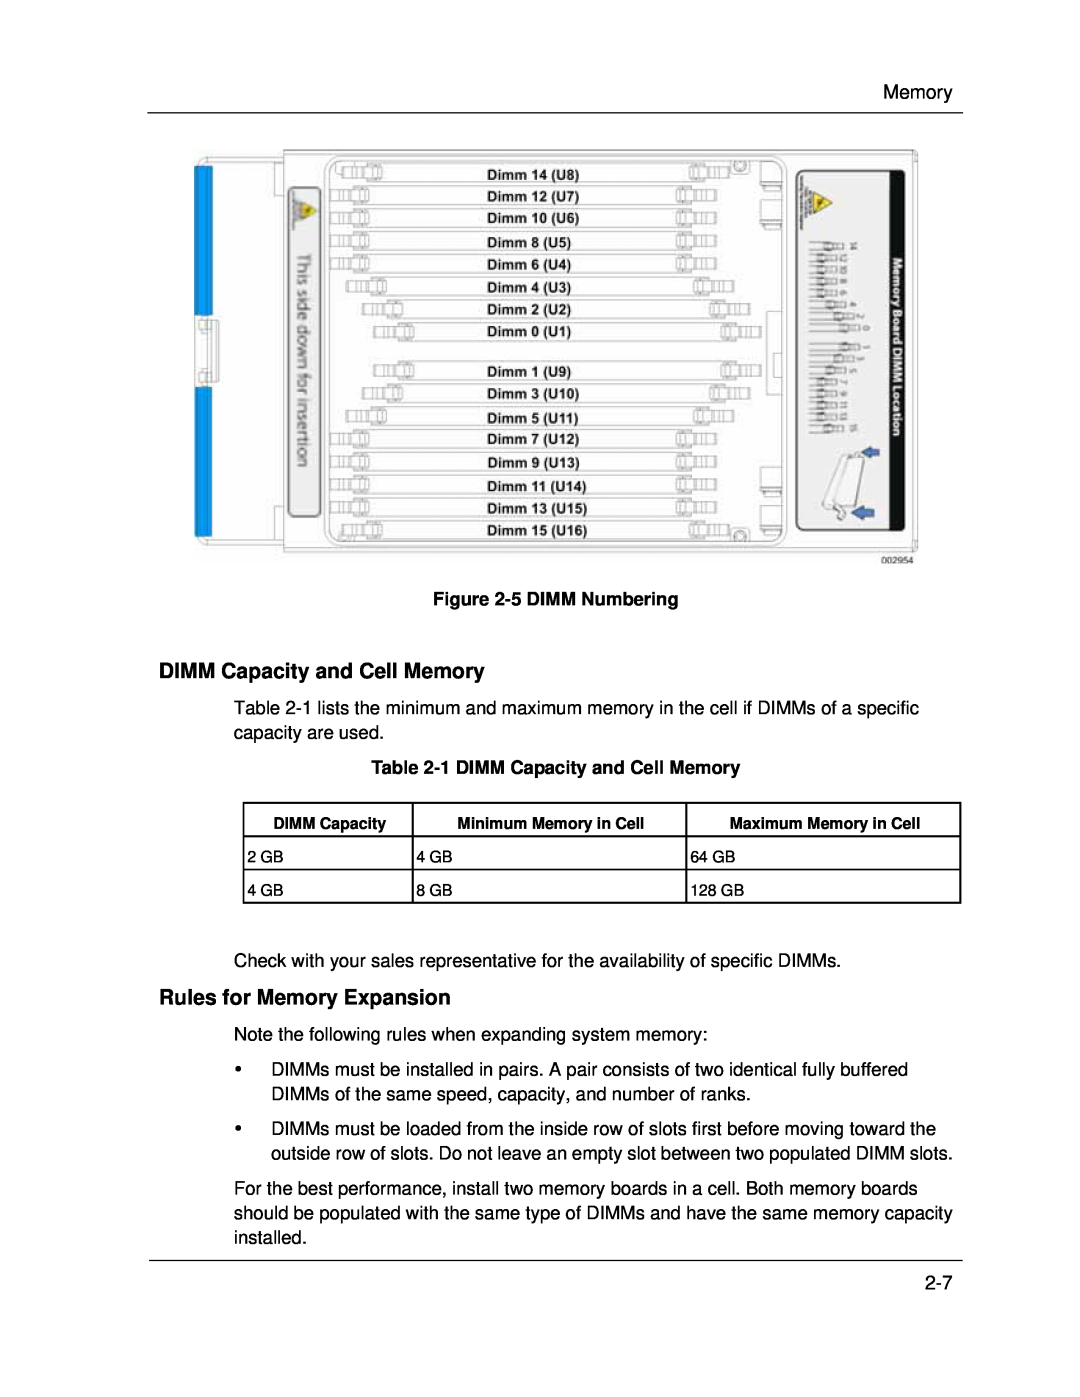 NEC A1160 manual Rules for Memory Expansion, 5DIMM Numbering, 1DIMM Capacity and Cell Memory 